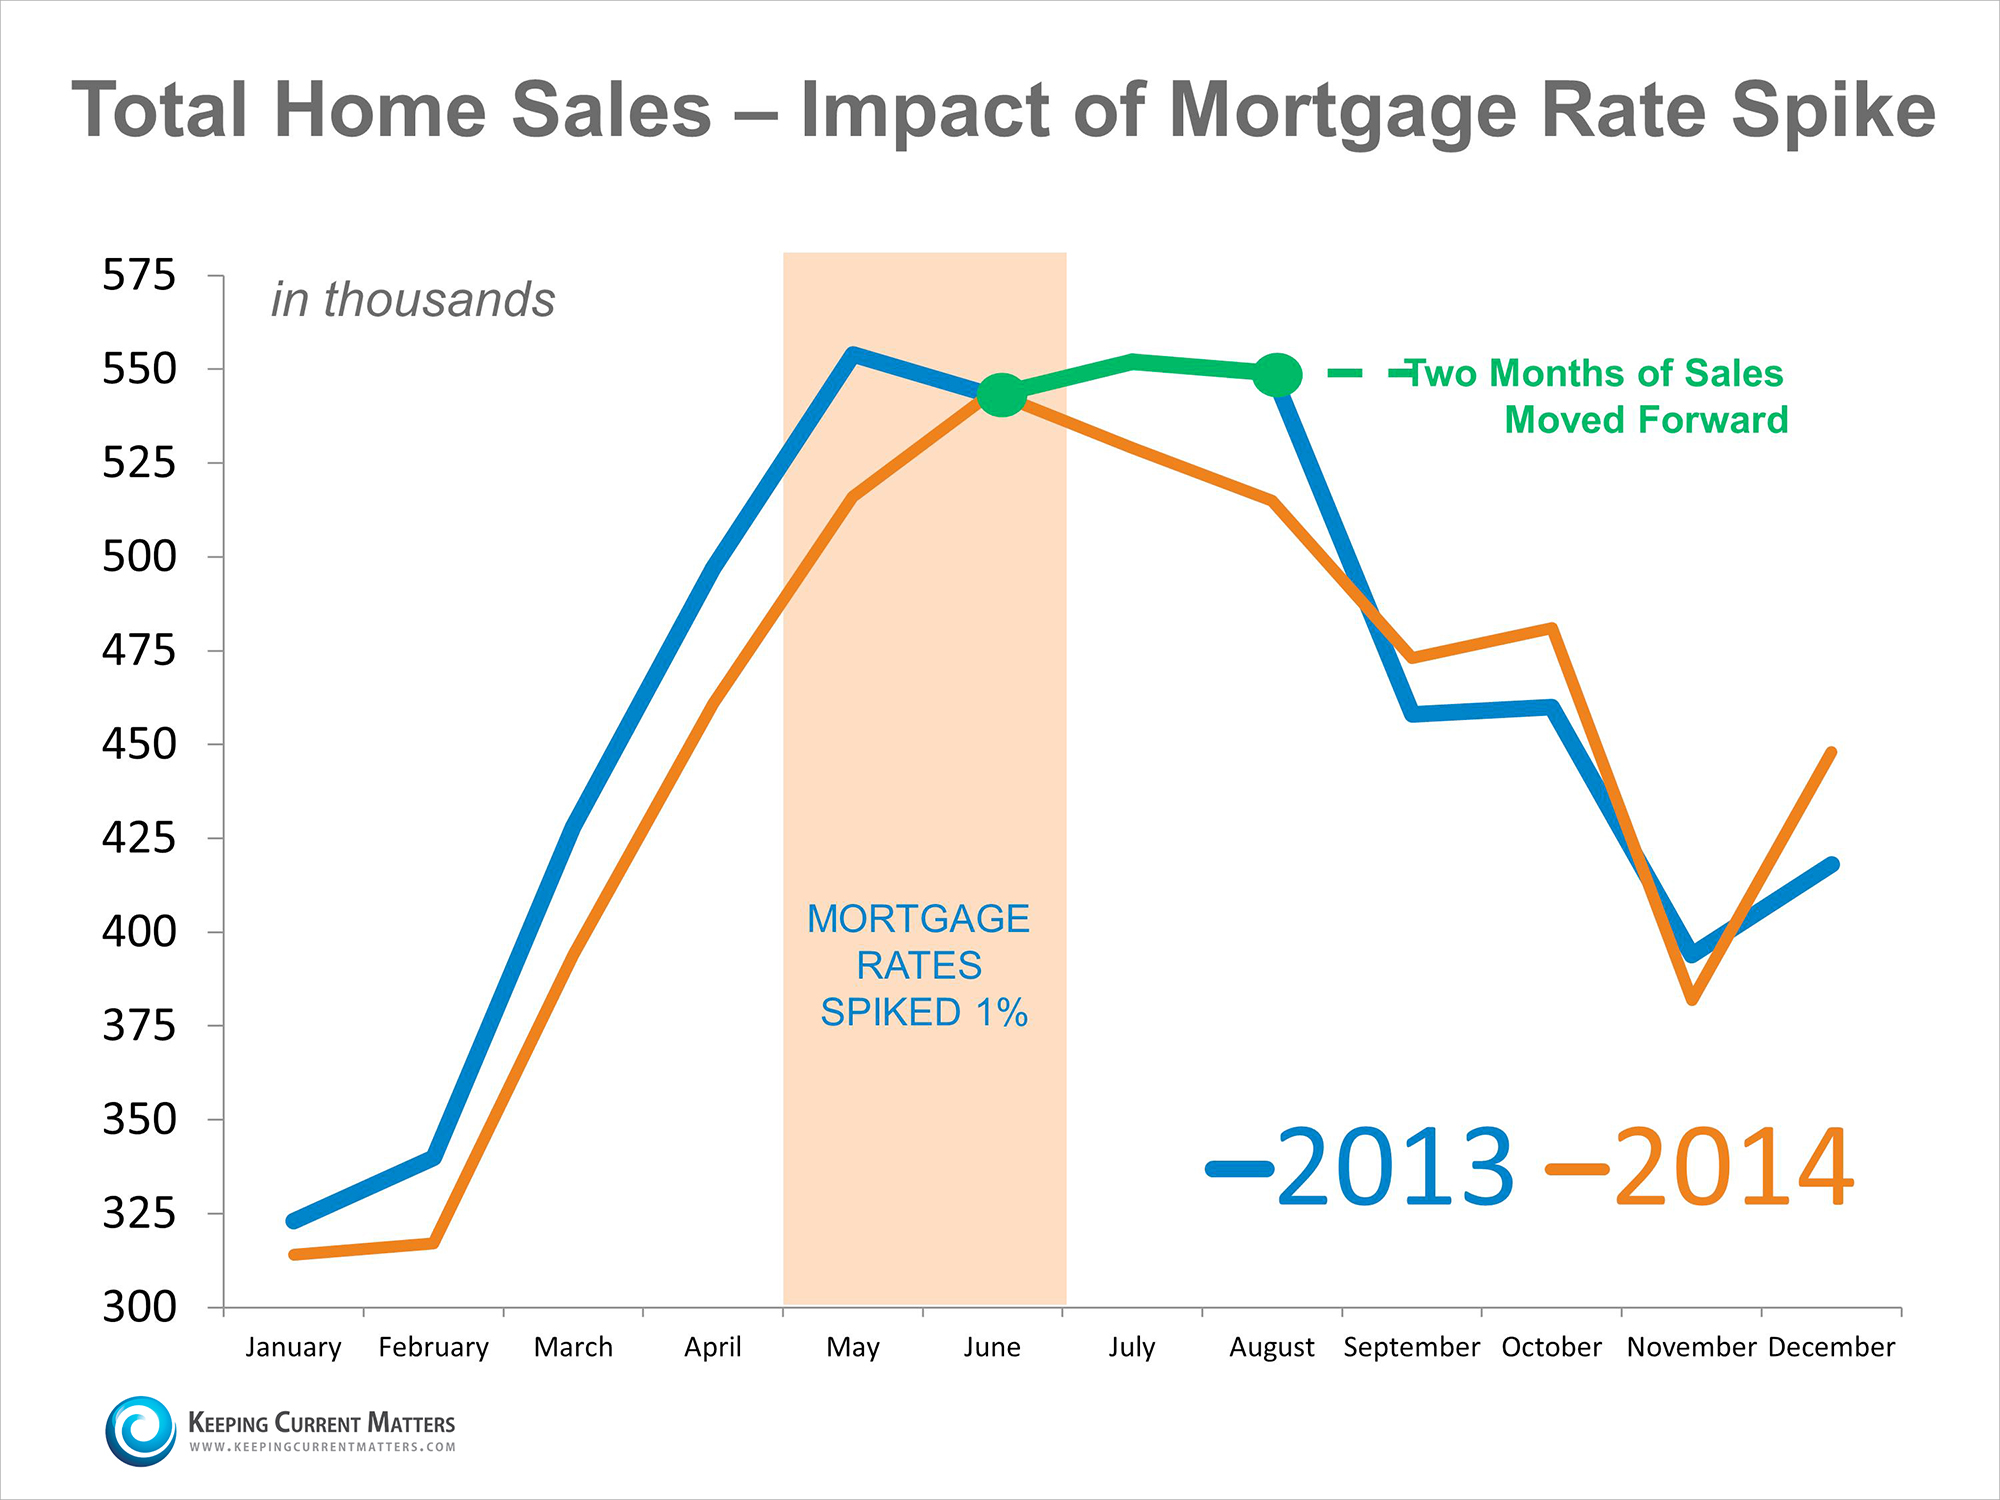 Home Sales & Impact of Mortgage Rate Spike | Keeping Current Matters